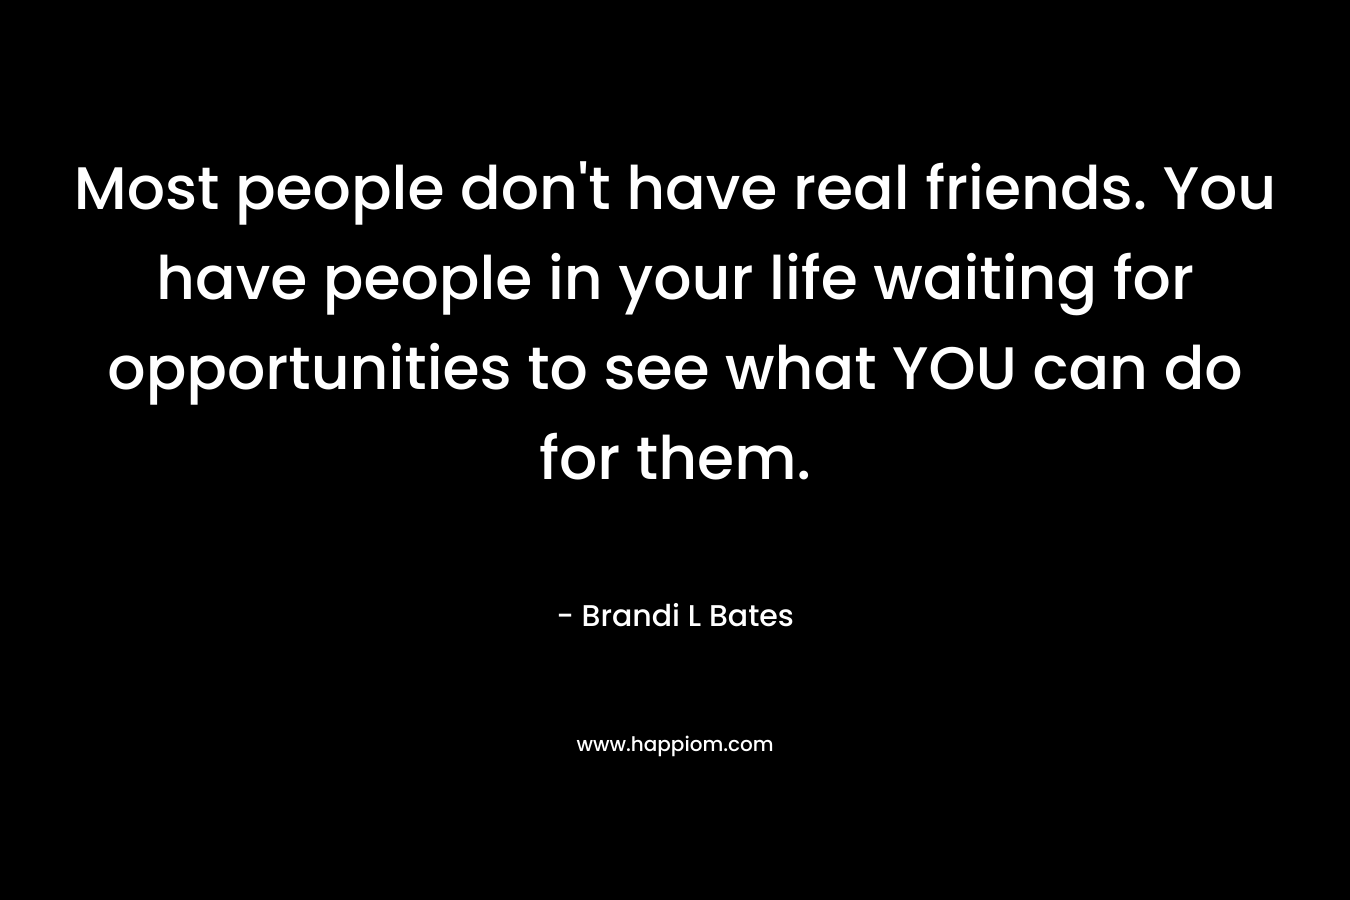 Most people don't have real friends. You have people in your life waiting for opportunities to see what YOU can do for them.